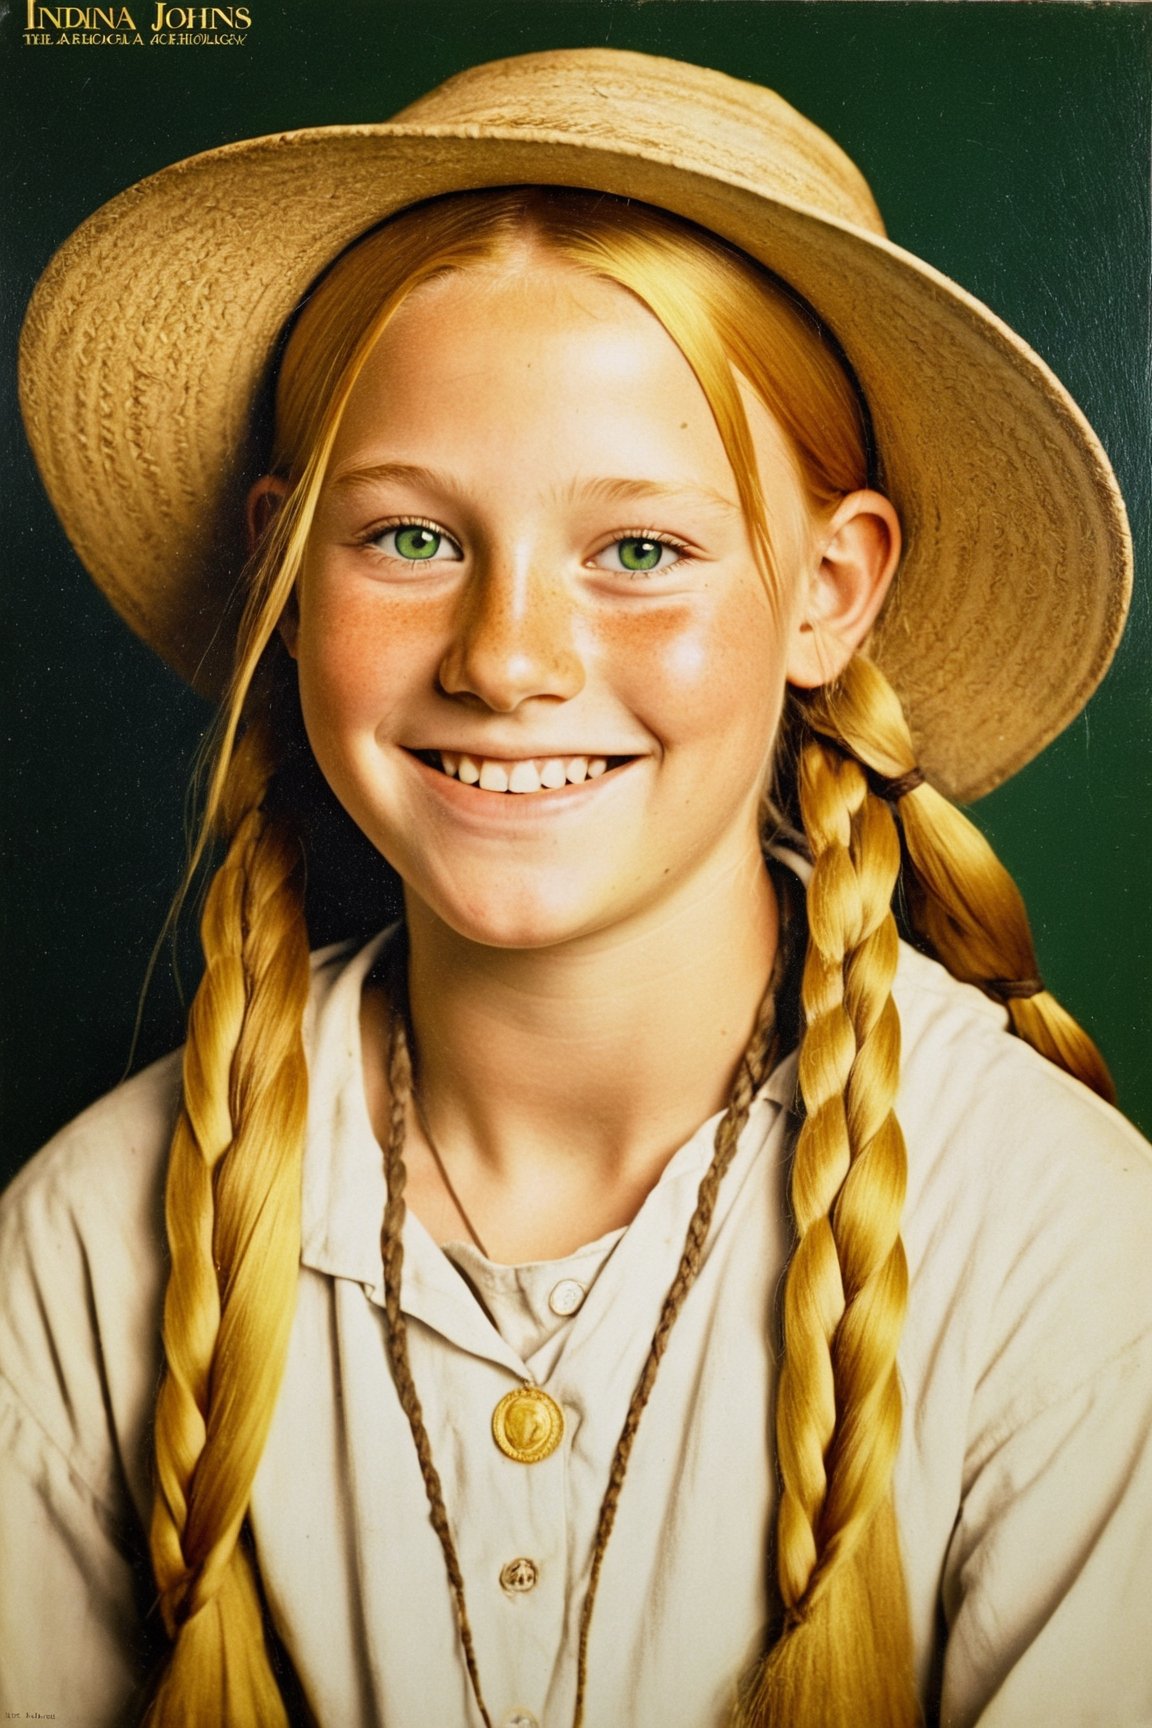 artist Indiana Johns, young girl, 14 year old, solo, completely naked, archaeologist, yellow hair, long braids, open forehead, panama hat, green eyes,  scorching sun, sweet smile, rarity, antiques, archeology, antiquity, archaeological excavation, divine, radiance, official art, stile Indiana Johns
